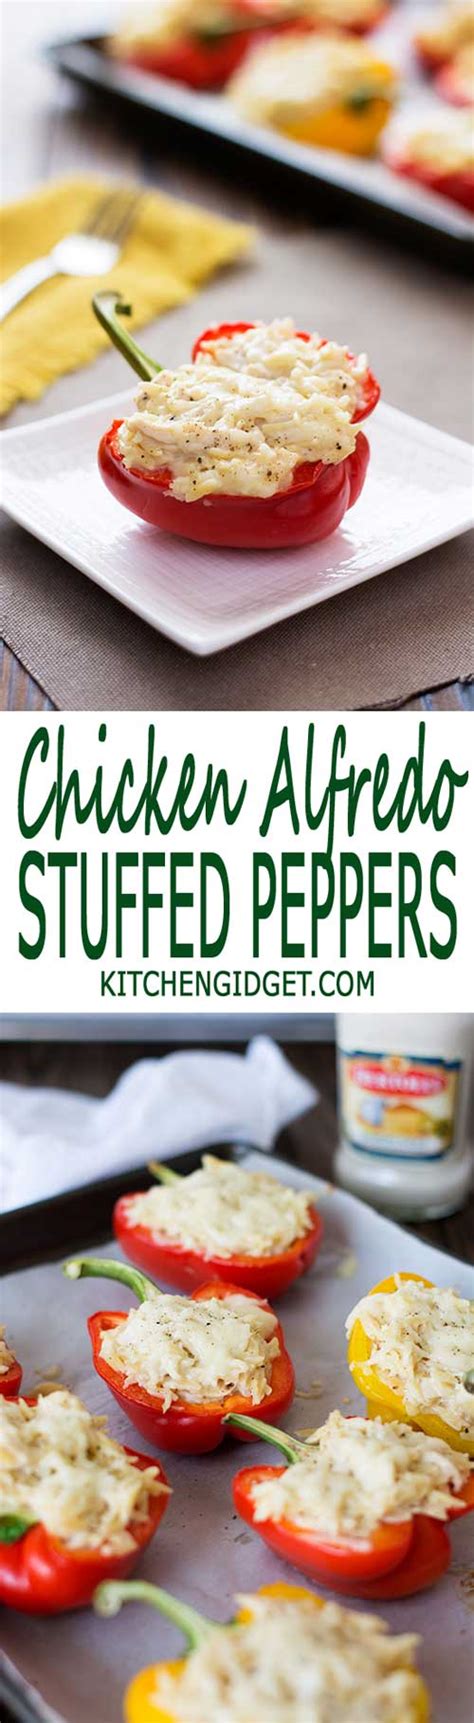 In a mixing bowl, combine 8 oz of softened cream cheese with ½ cup of sour cream then add 3 cups of cooked and shredded chicken, 1 pack of thawed and drained spinach, 1 cup of cheddar cheese, 2 thinly sliced green onions and ½ teaspoon of paprika. Chicken Alfredo Stuffed Peppers - Kitchen Gidget